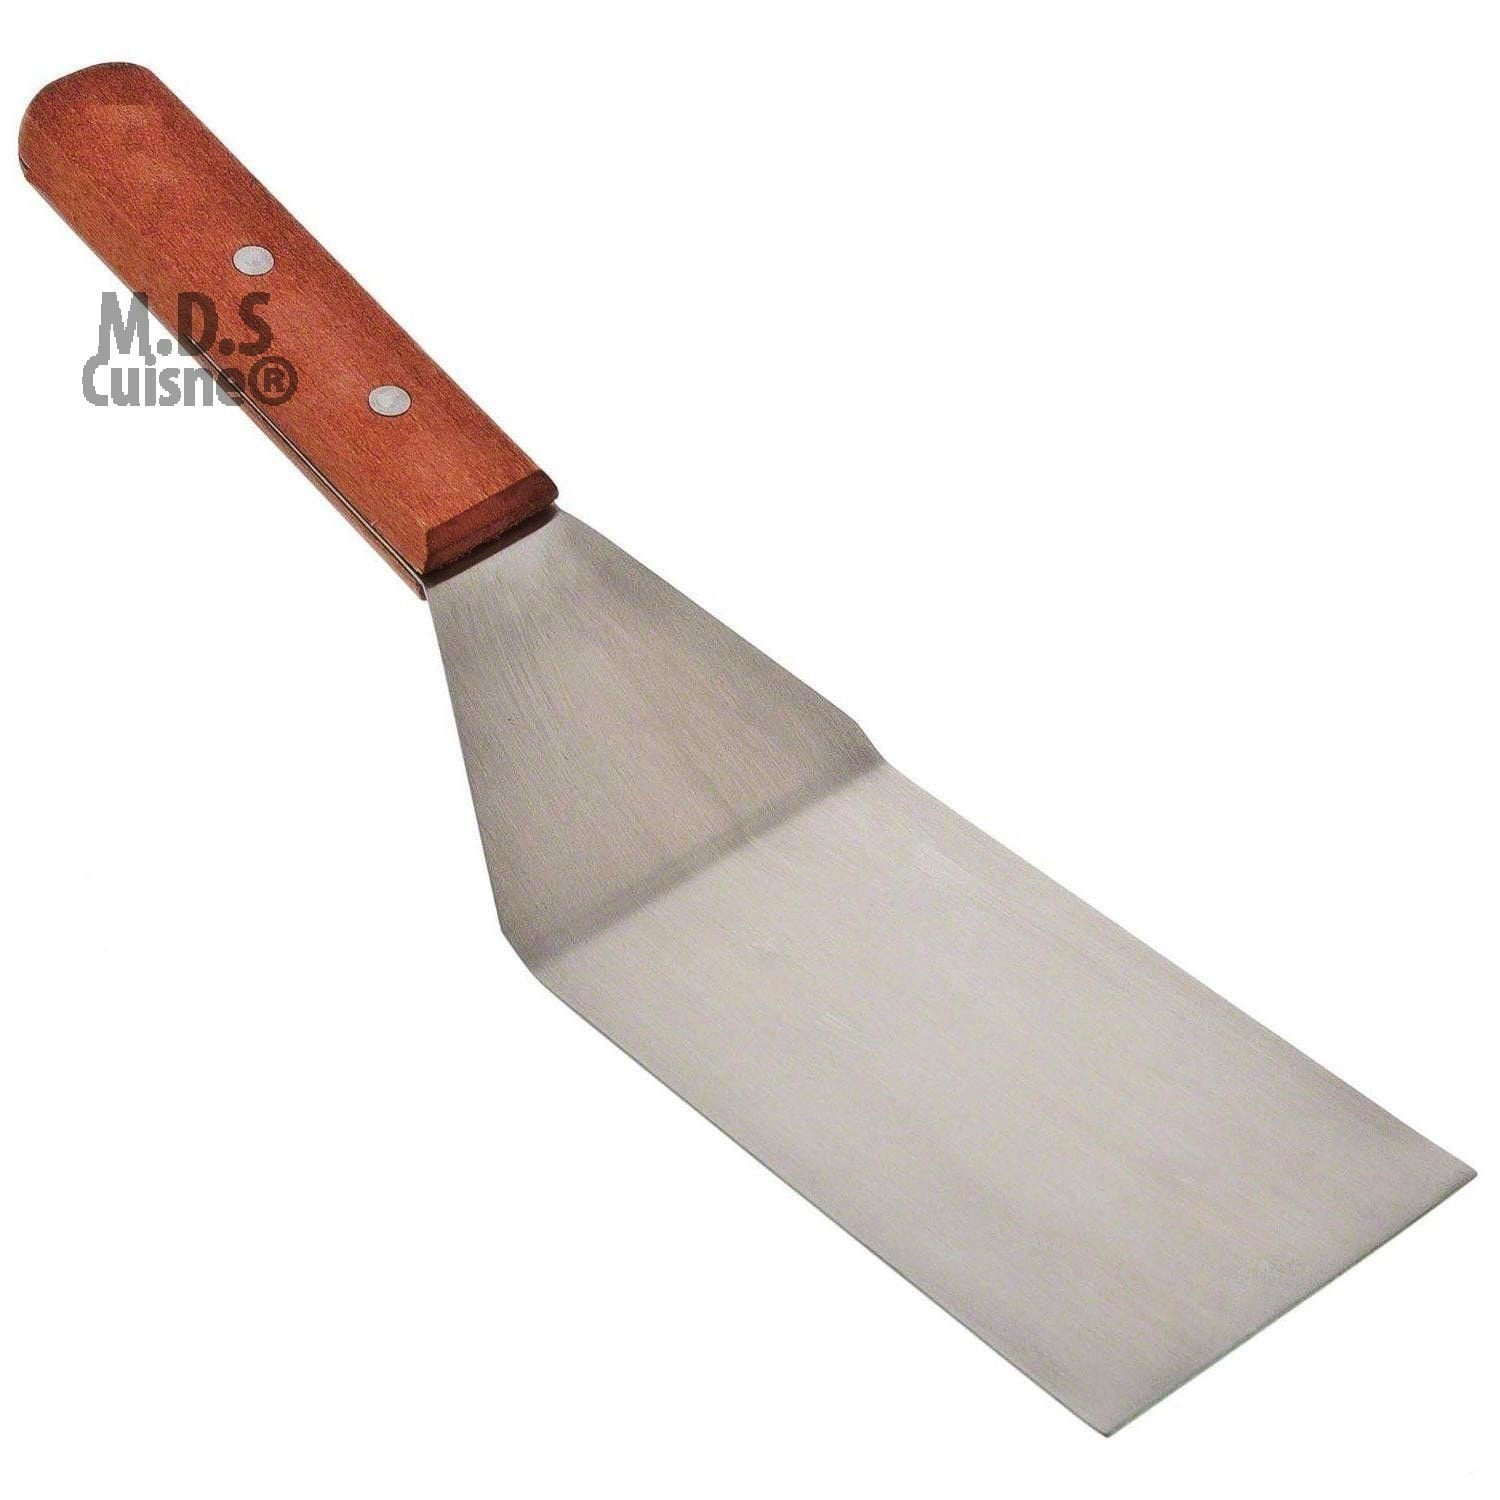 New. Spatula from Chef Craft Stainless Steel Blade with Wood Handle 